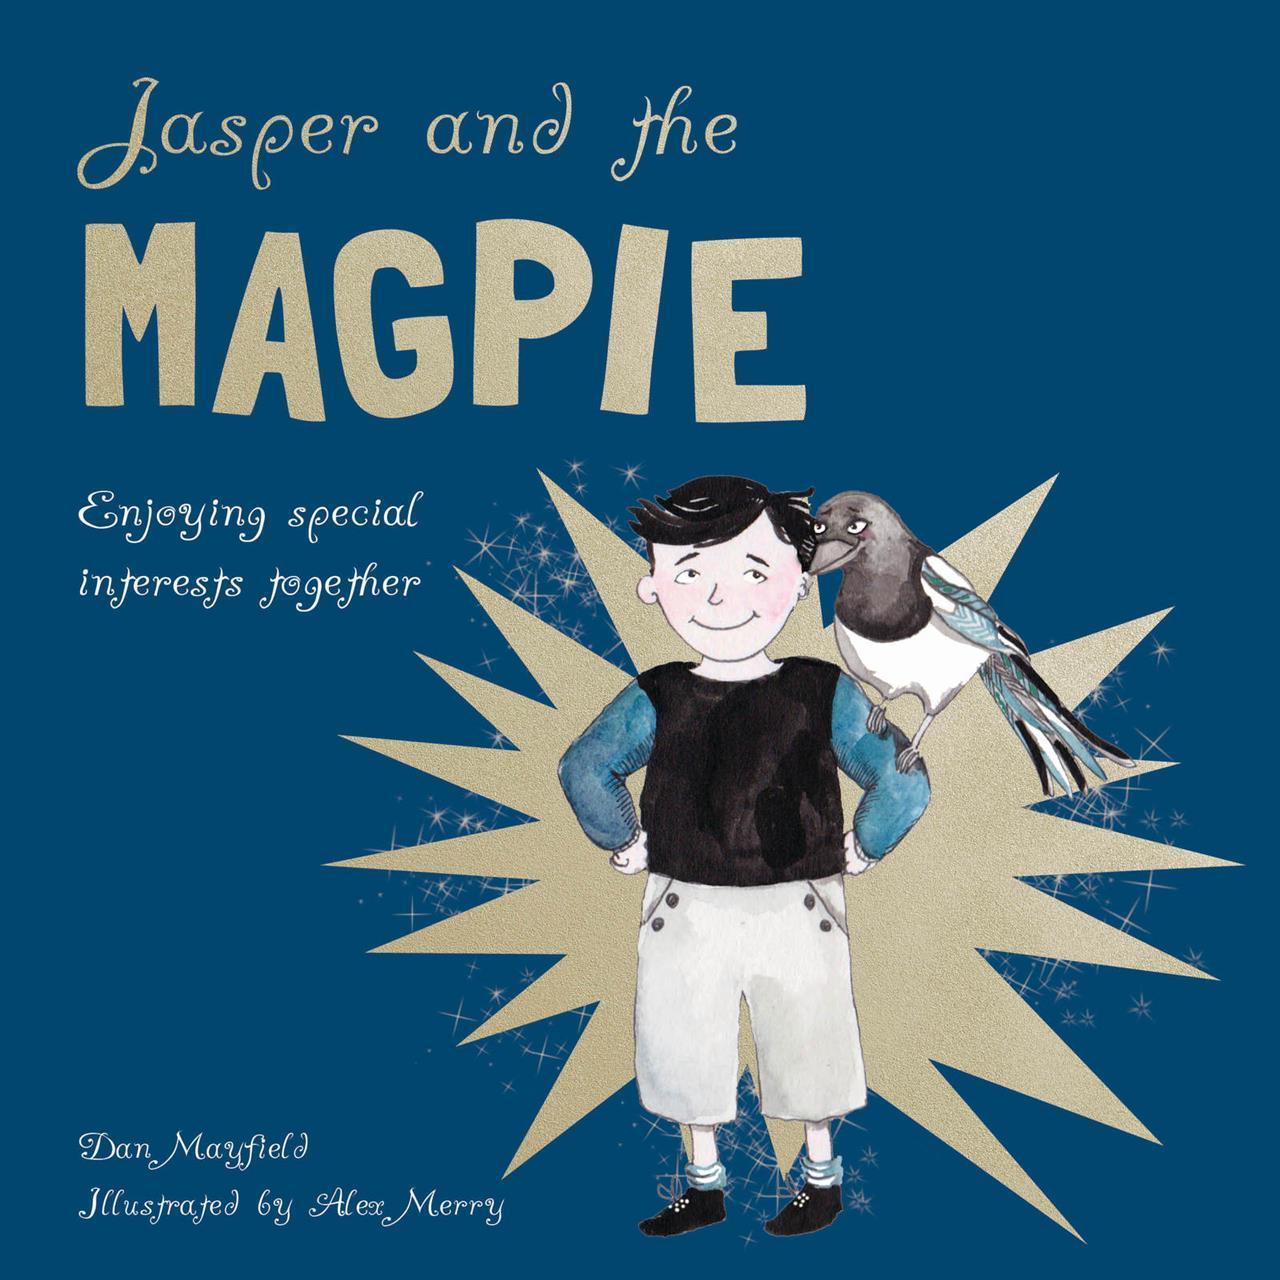 Jasper and the Magpie